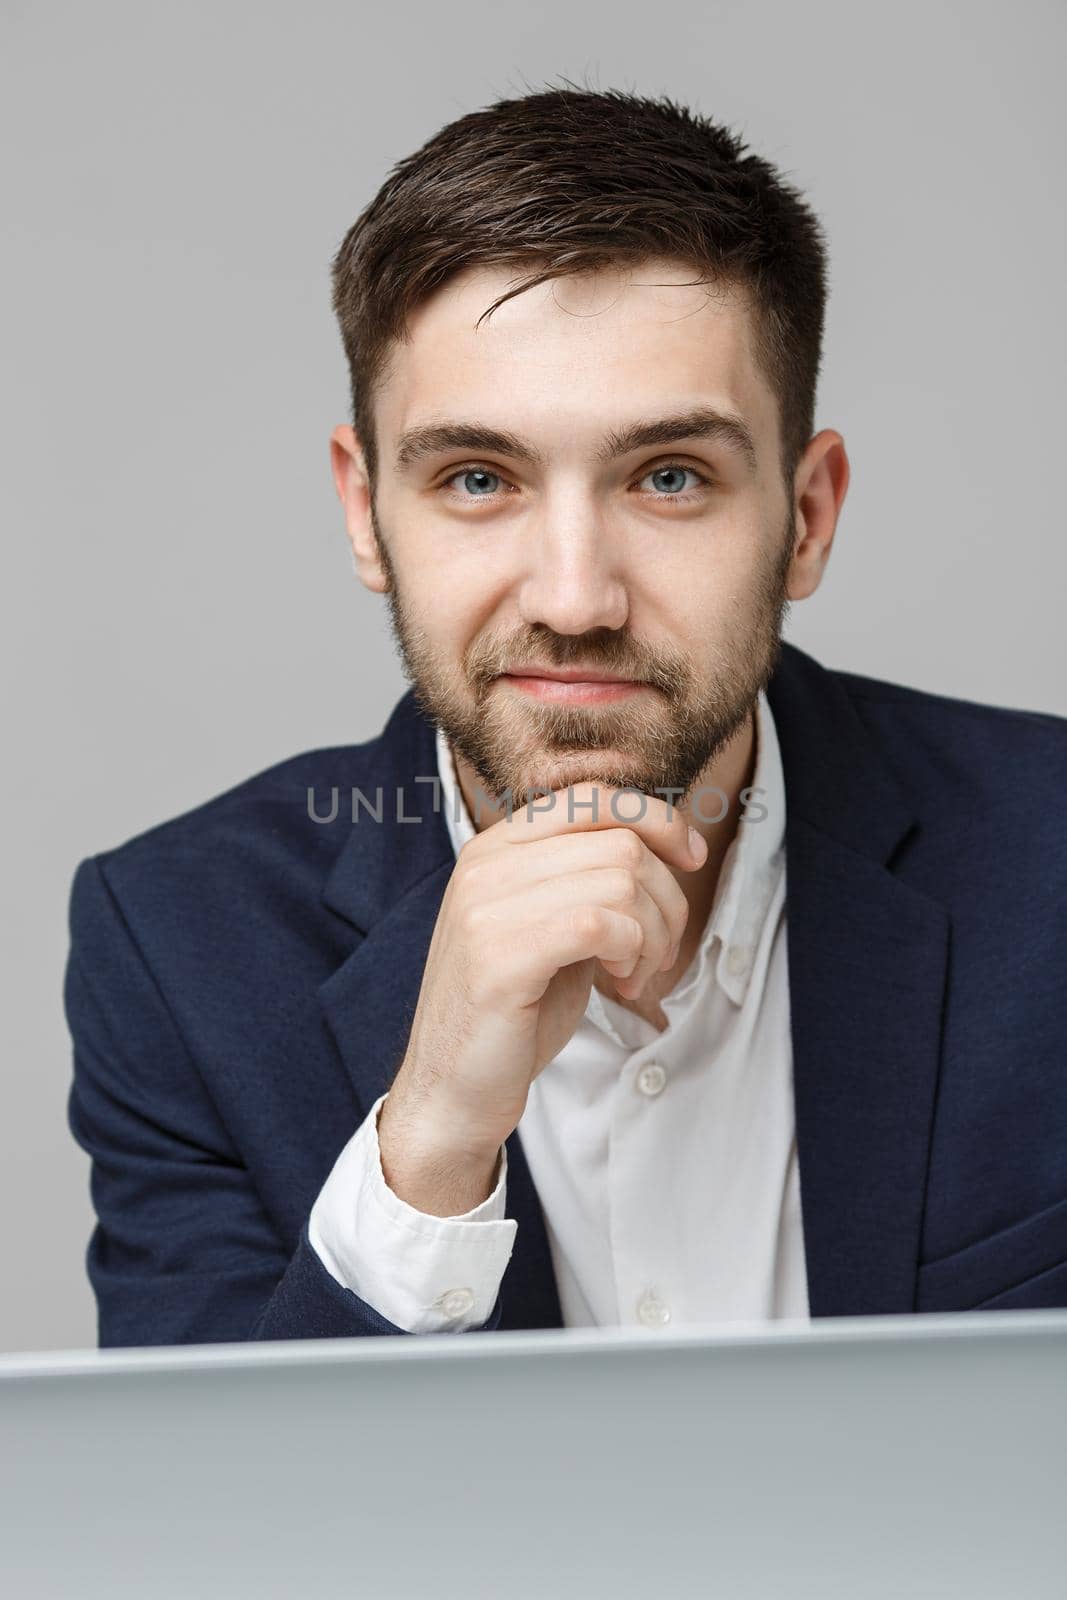 Business Concept - Portrait handsome serious business man in suit looking at work in laptop. White Background.